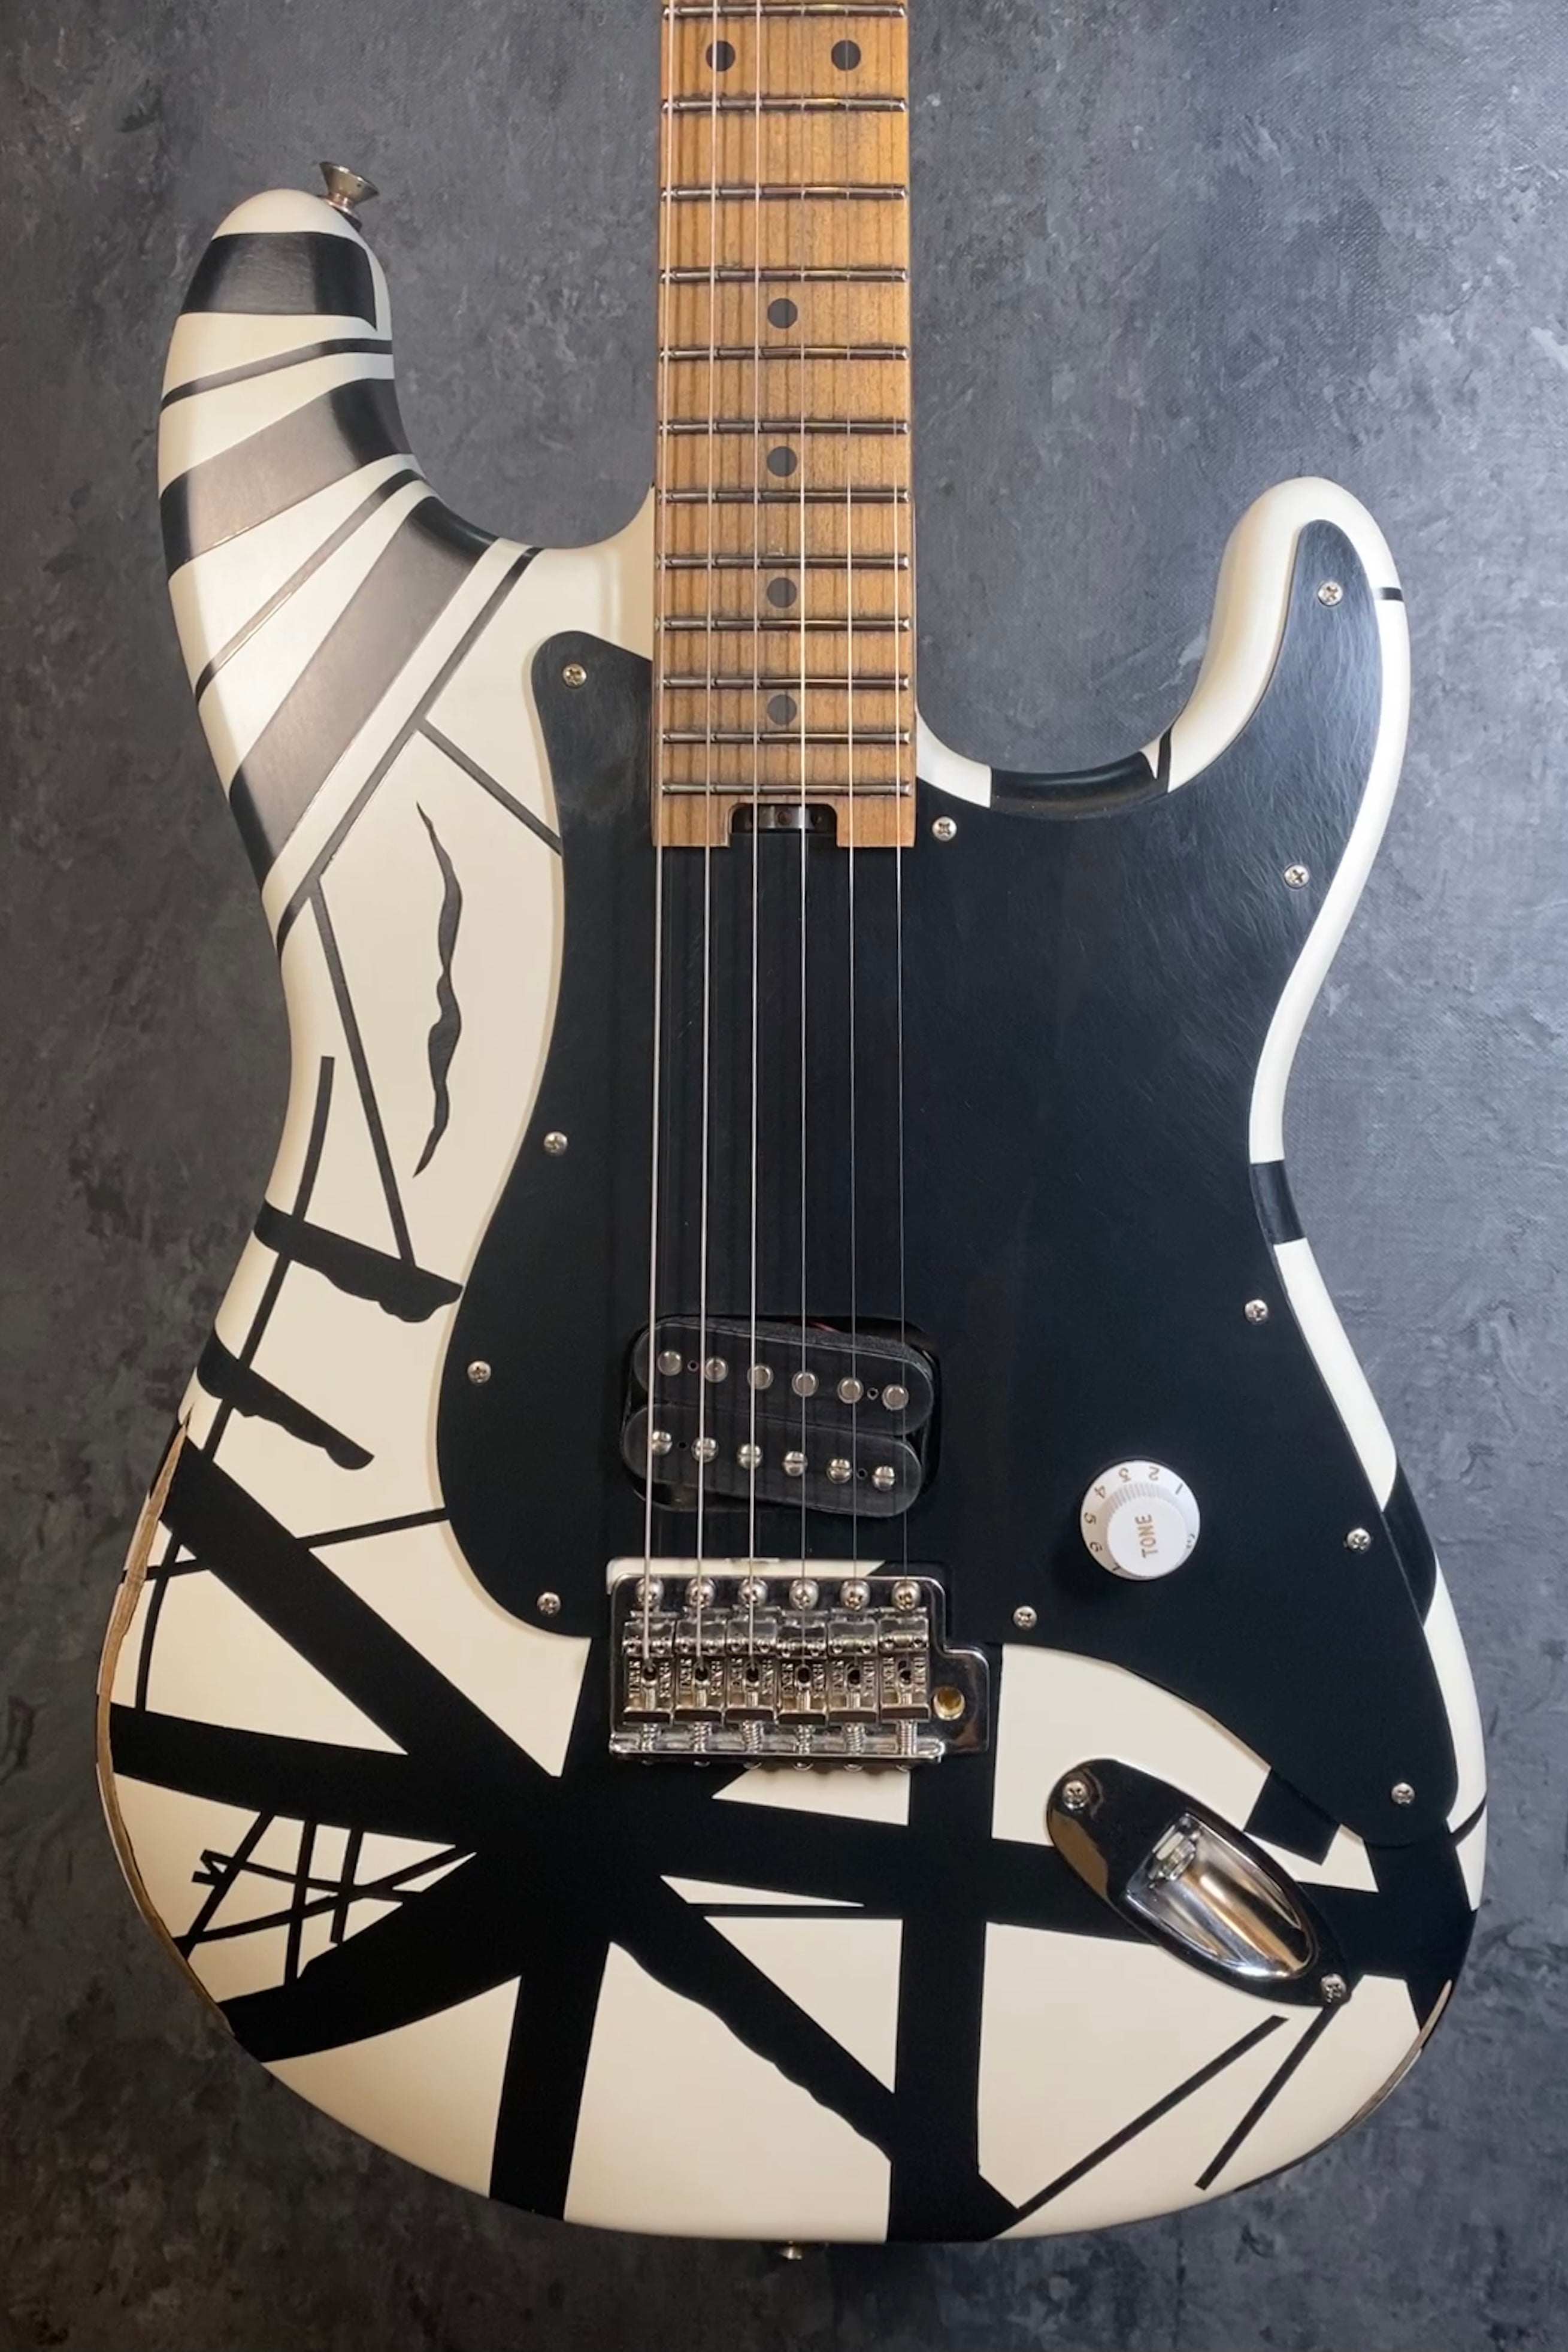 EVH Striped Series 78 Eruption Electric Guitar in Black with White 